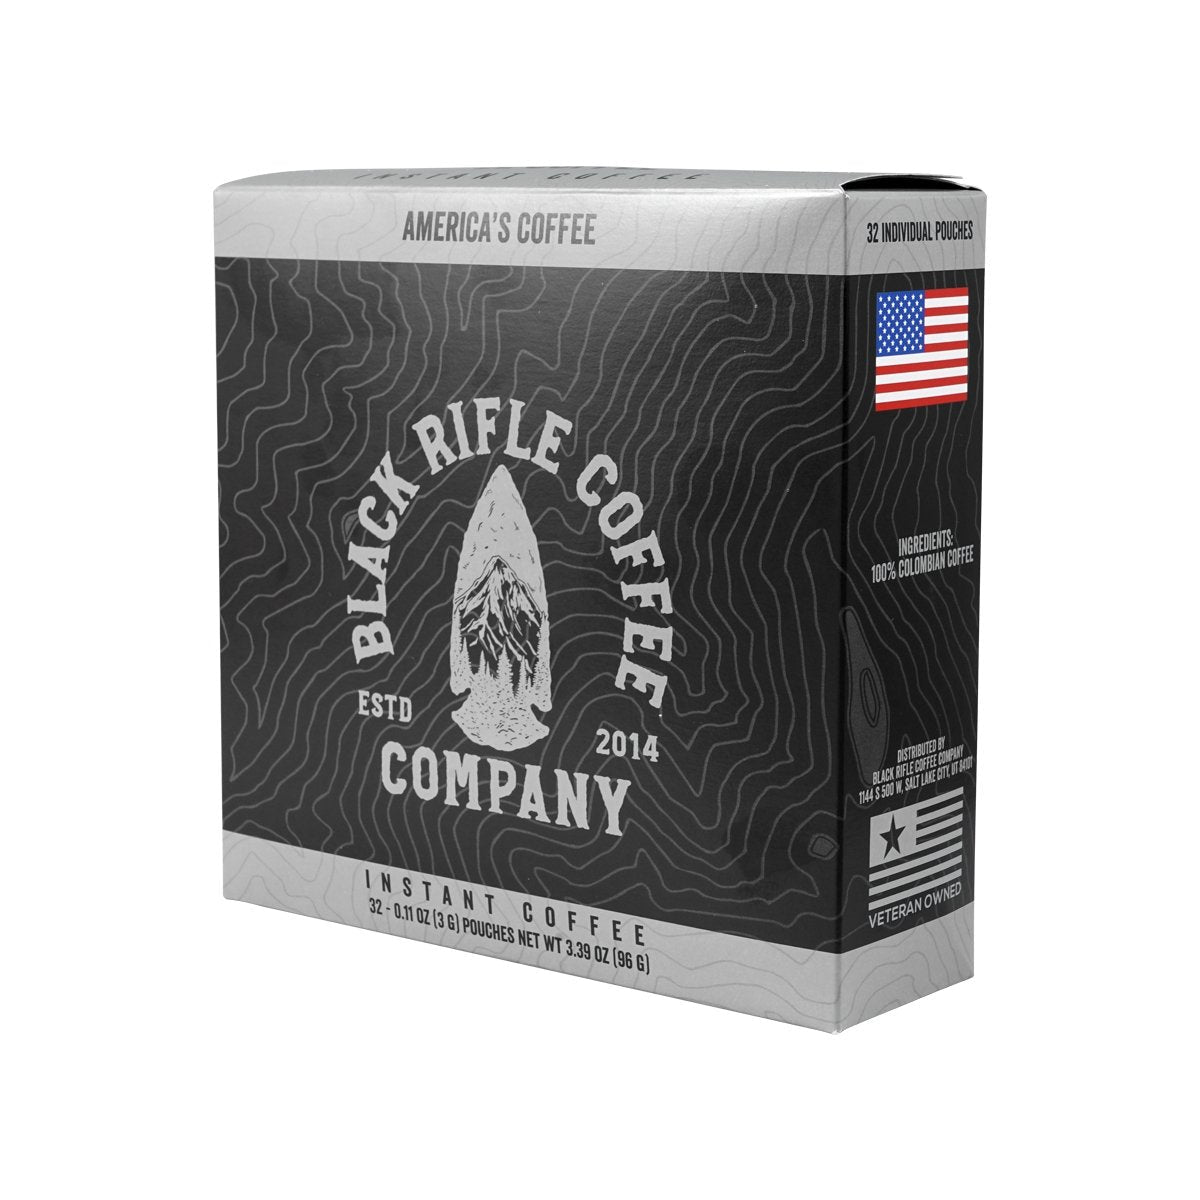 Black Rifle Coffee - Instant Coffee Case (6 Boxes) - Pacific Flyway Supplies